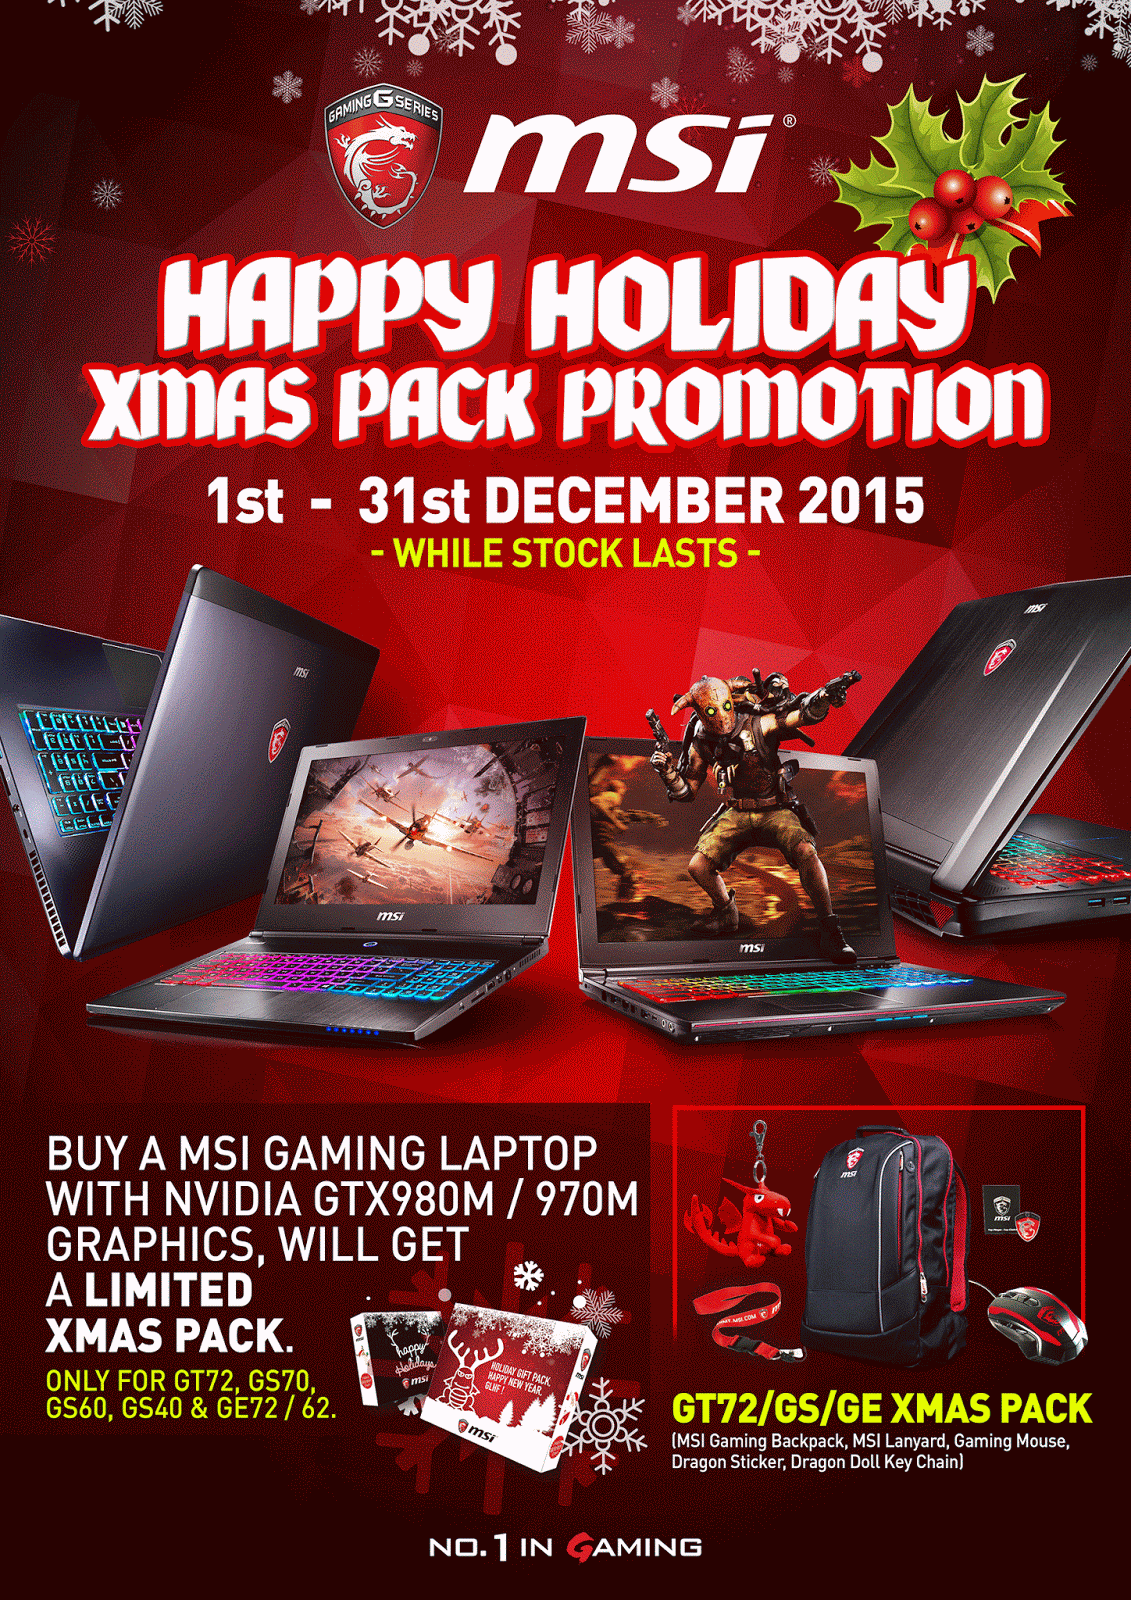 Måler indvirkning Overlegenhed MSI Malaysia - Top Player Top Choice: Buy a MSI Gaming Notebook with  GTX980m/970M and receive a X'mas Pack from MSI!